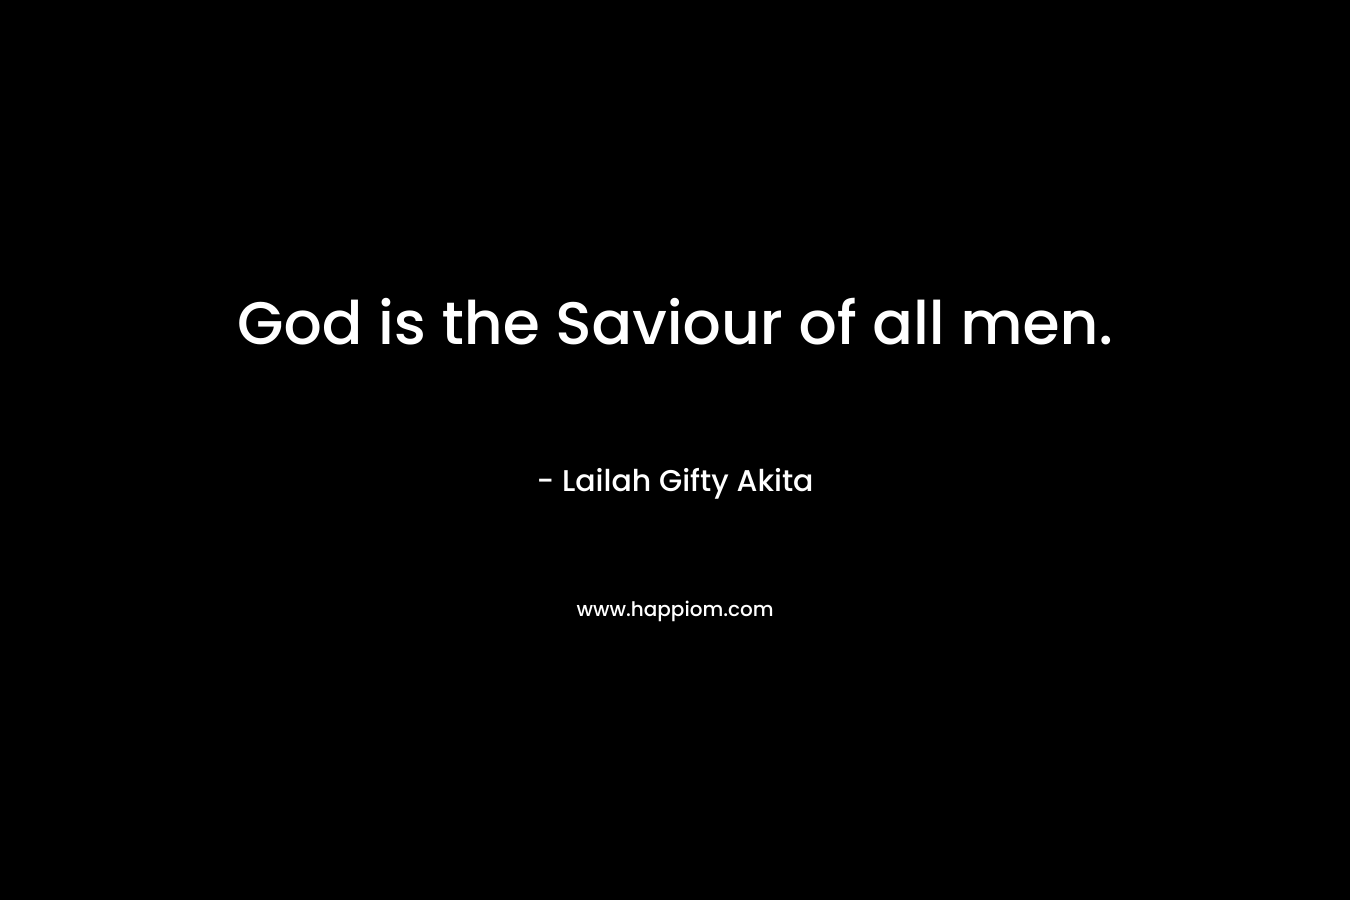 God is the Saviour of all men.